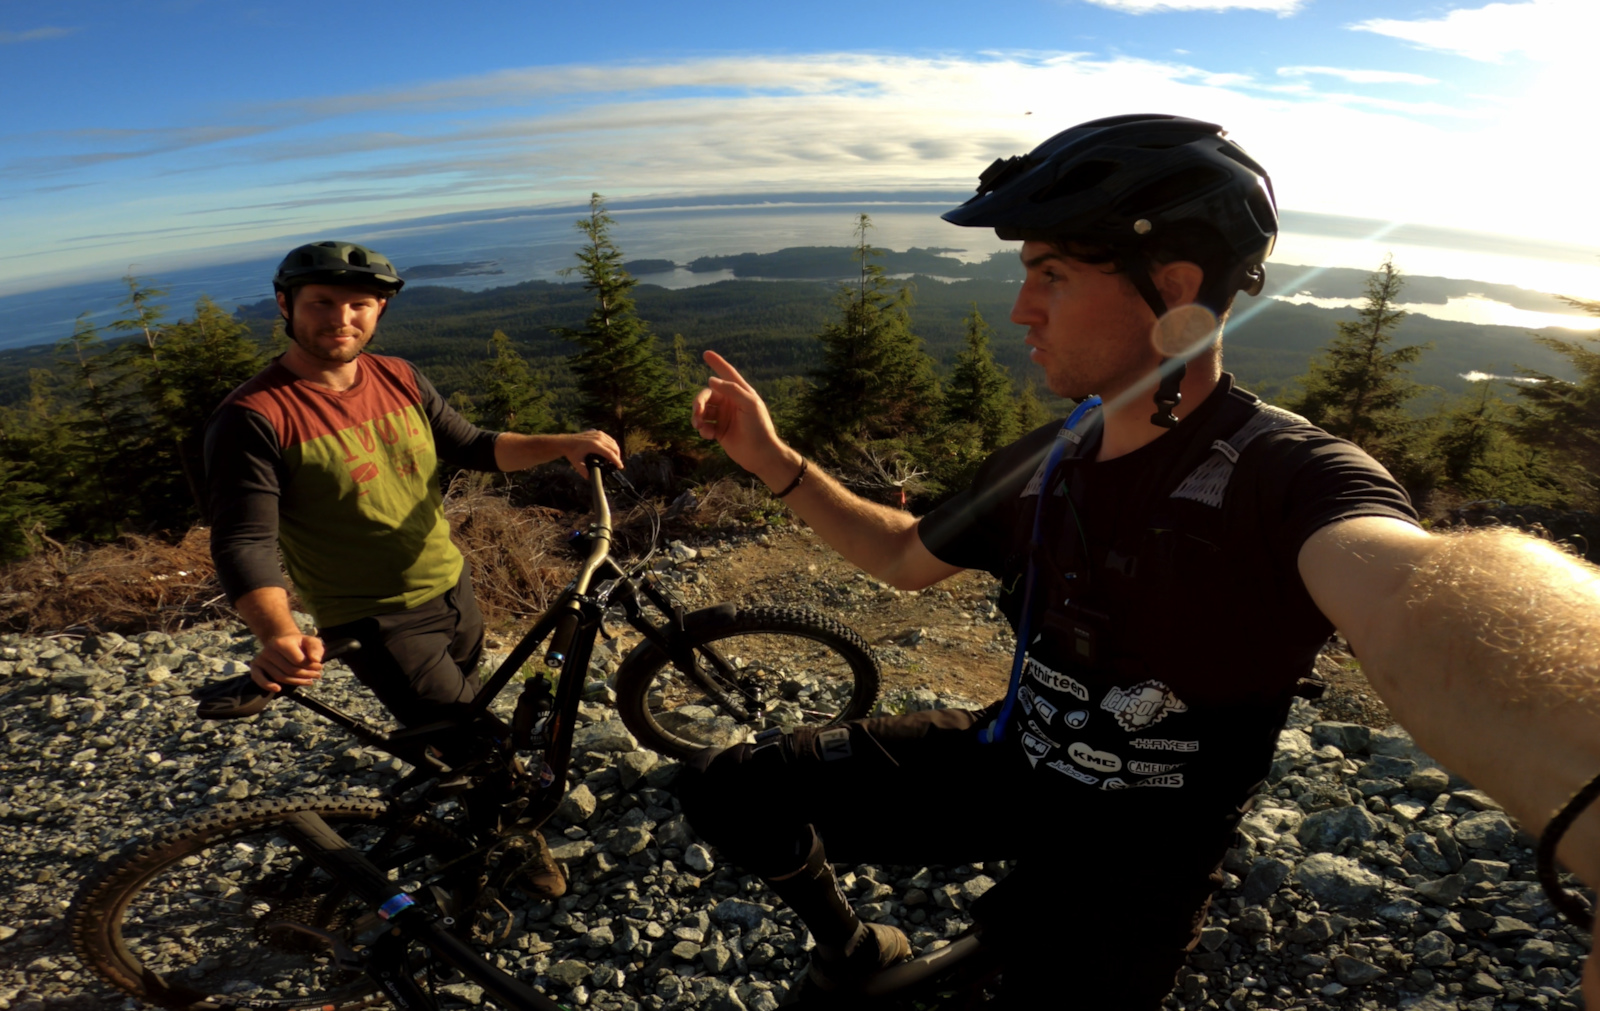 Top Of Ucluelet. New video tomorrow at 8AM!